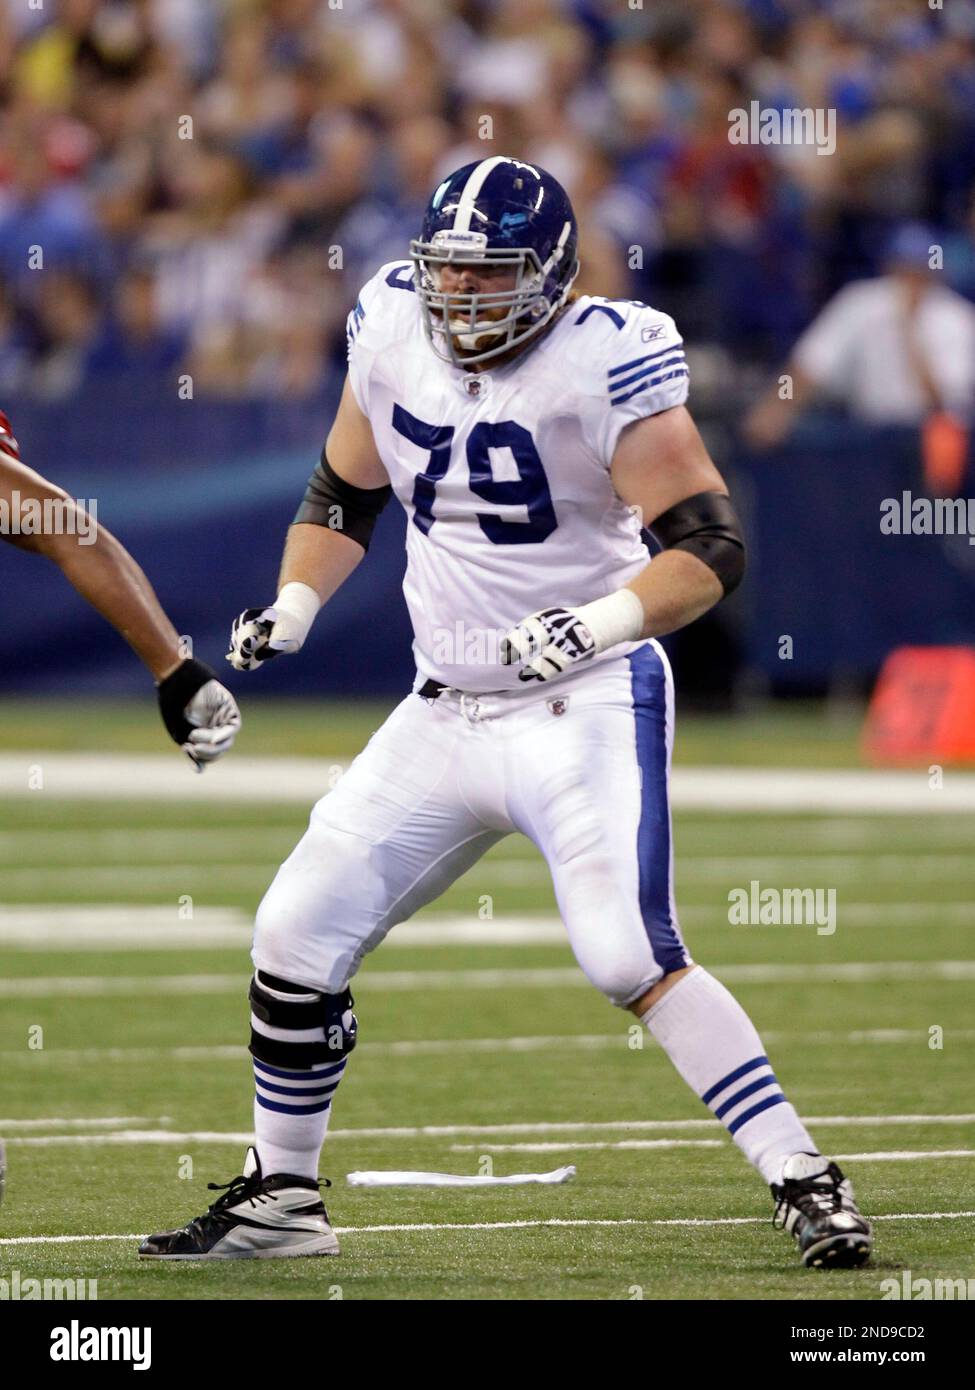 Indianapolis Colts offensive tackle Adam Terry in the fourth quarter of an NFL preseason football game in Indianapolis, Sunday, Aug. 15, 2010. (AP Photo/Michael Conroy) Stock Photo